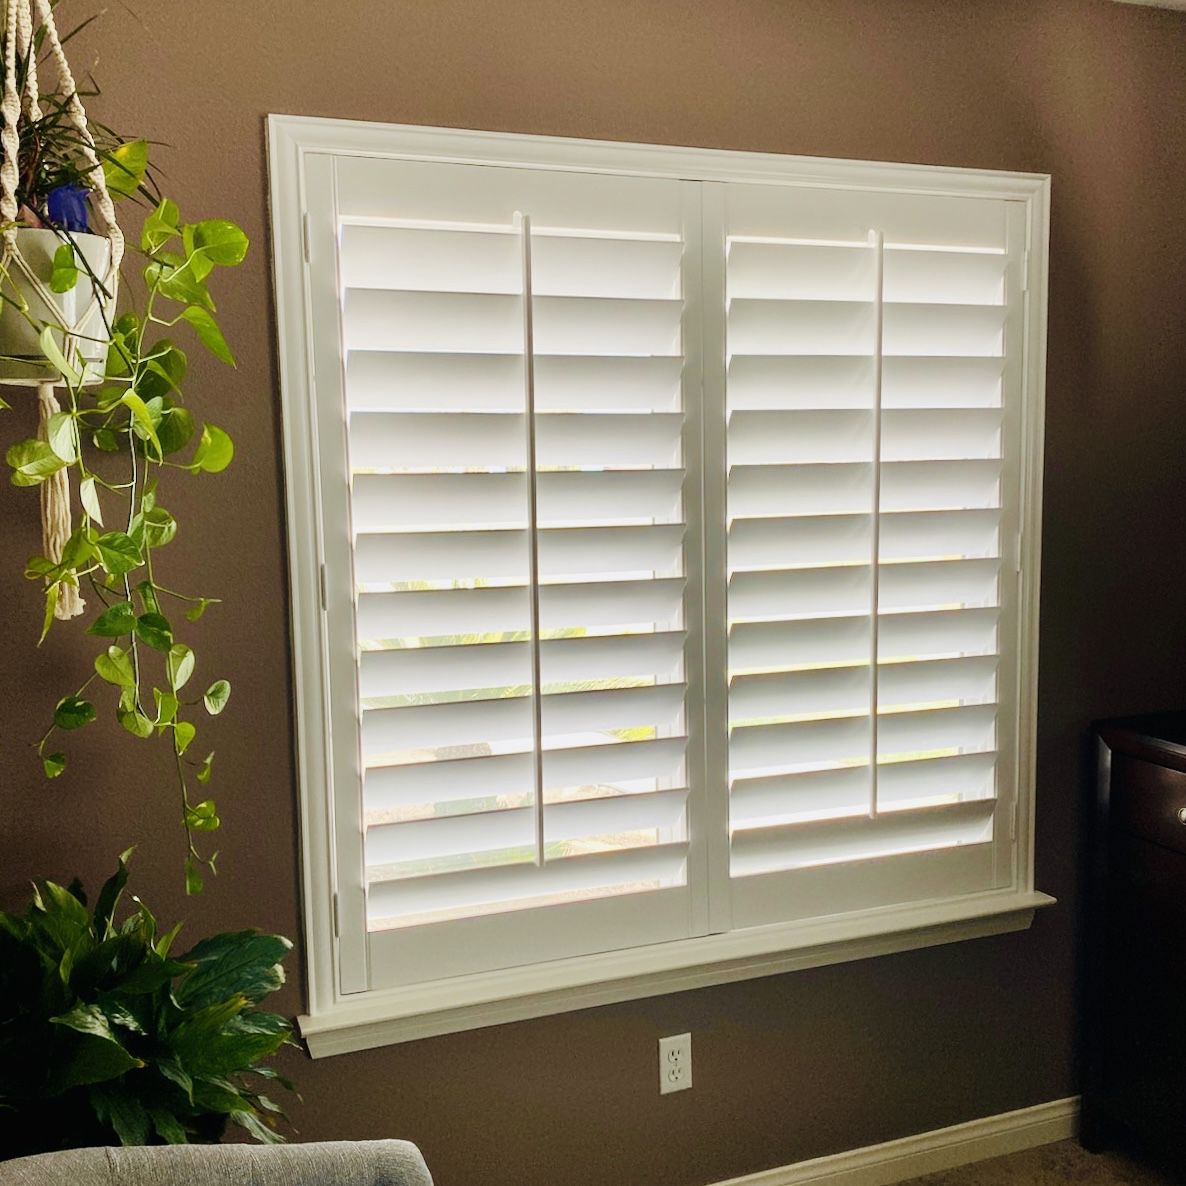 Wood Interior Shutters - Windows, Sliding / French Door, Persianas de Madera, Home, Business, Shutter Blinds, Coverings, Treatments, Molding, Trim. Qu